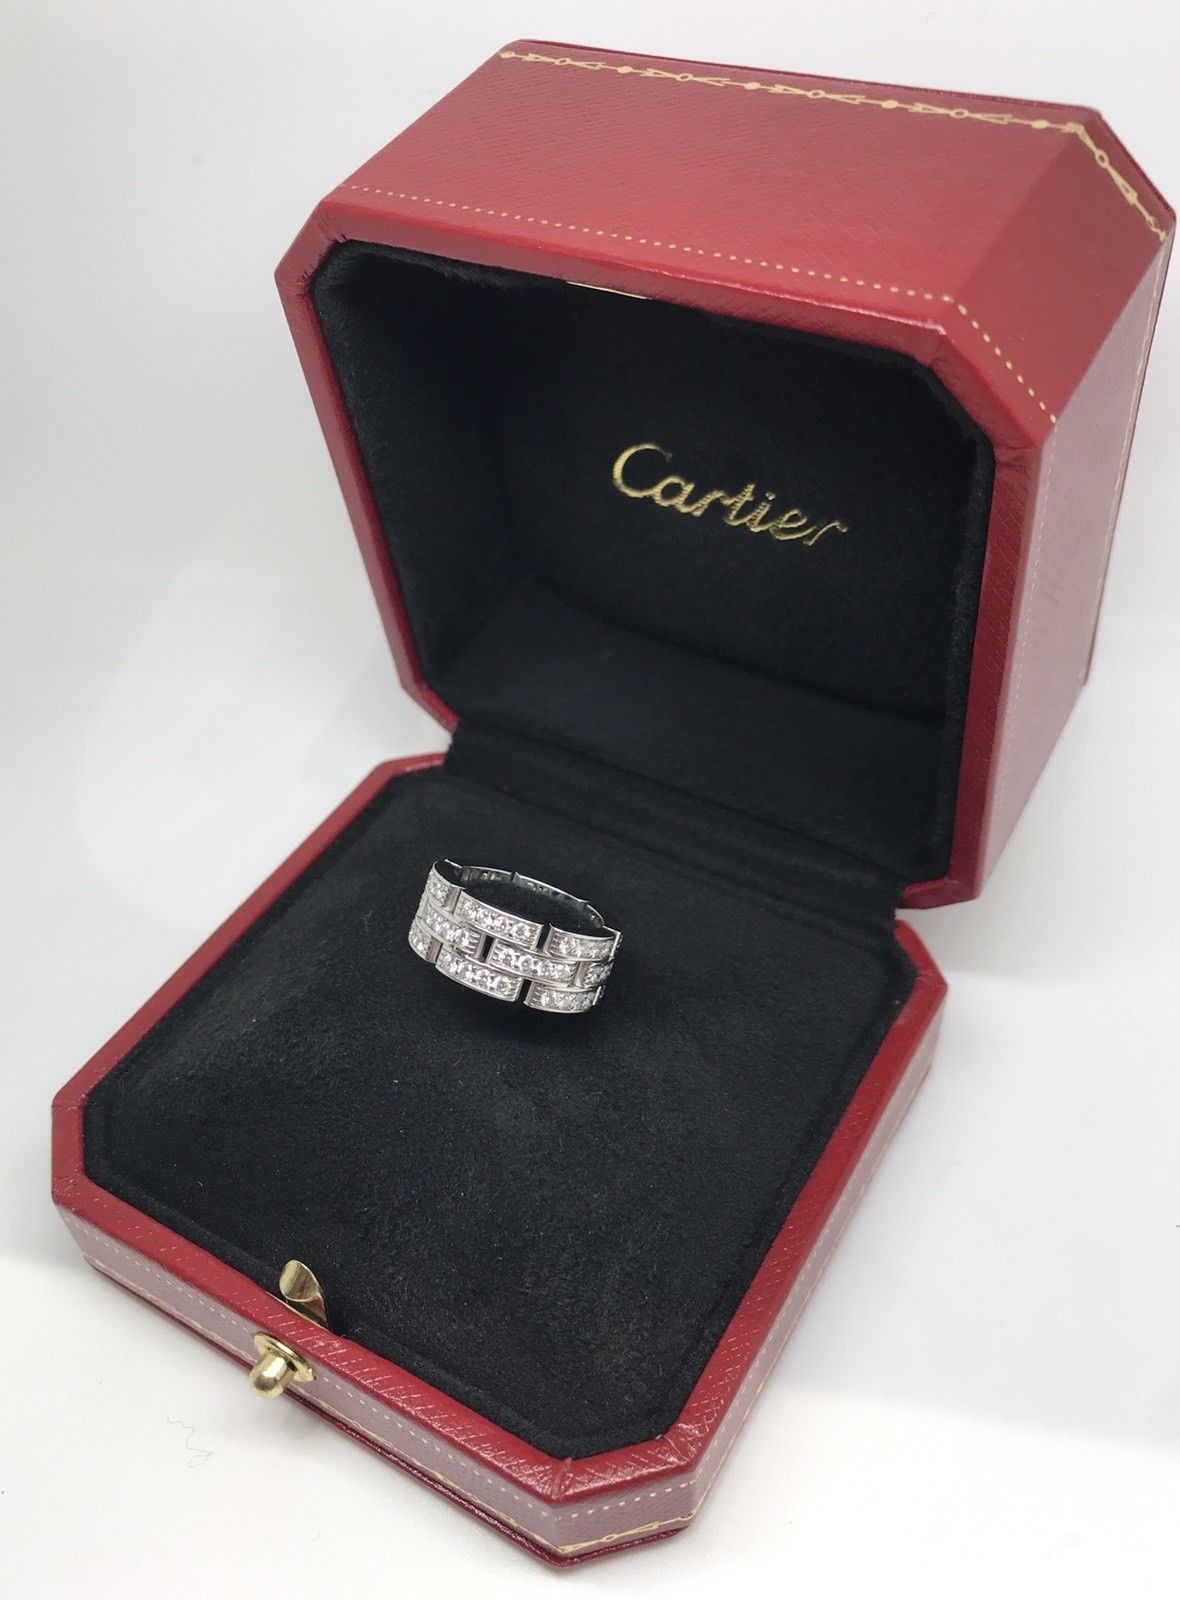 Cartier Maillon Panthere Diamond Ring 18k - Image 6 of 12